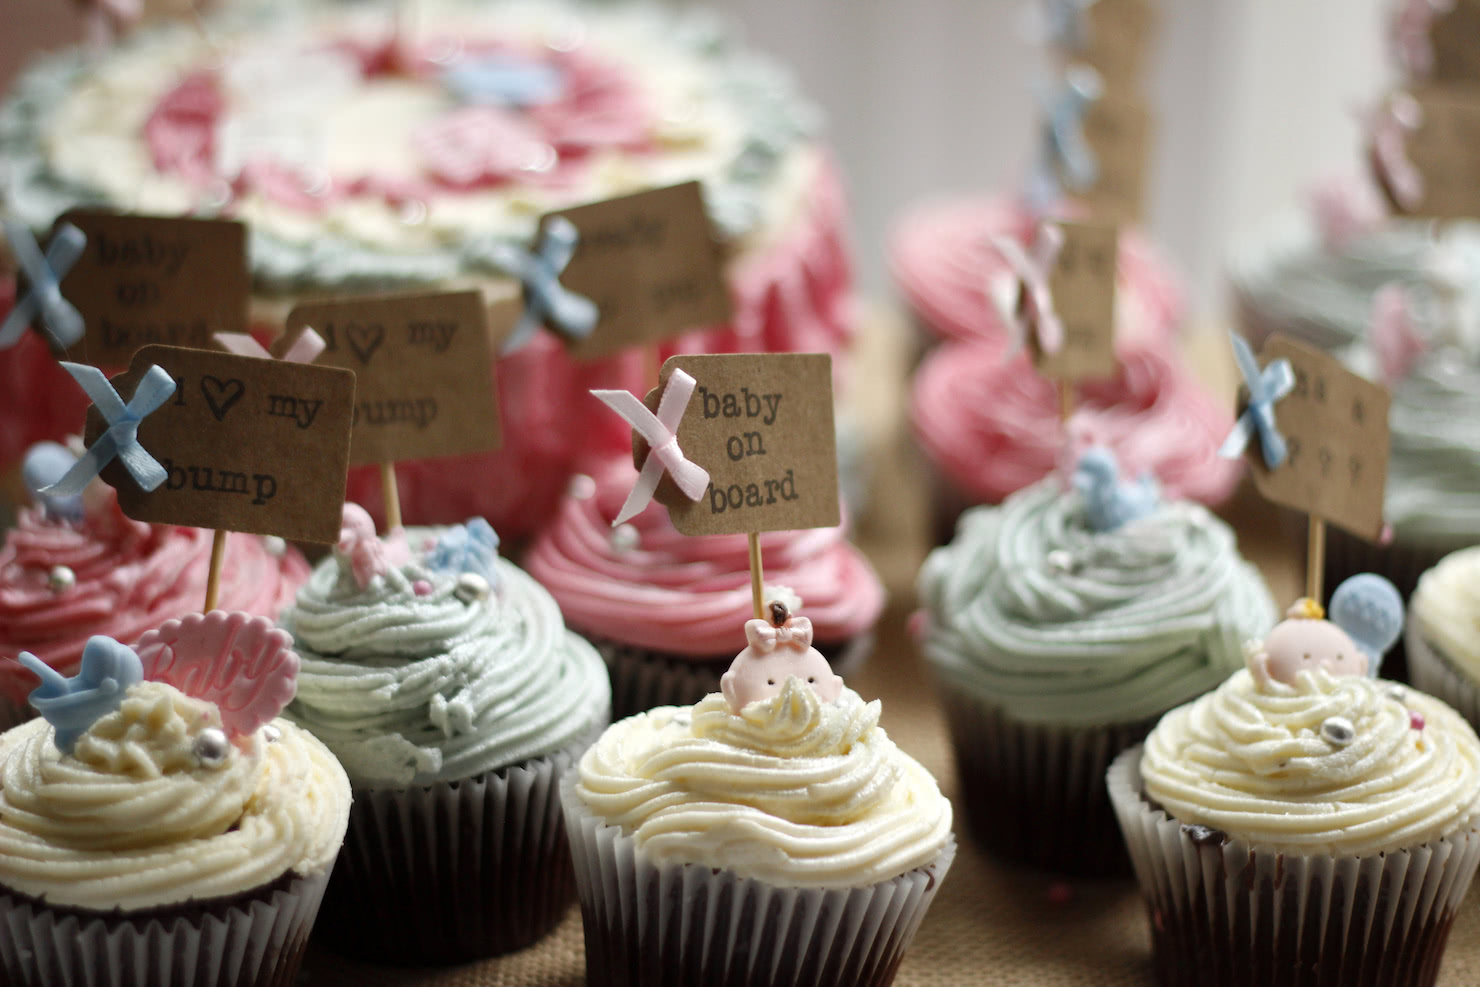 Tri-colored cupcakes featuring personalized cupcake toppers that say "baby on board, and "i heart my bump"